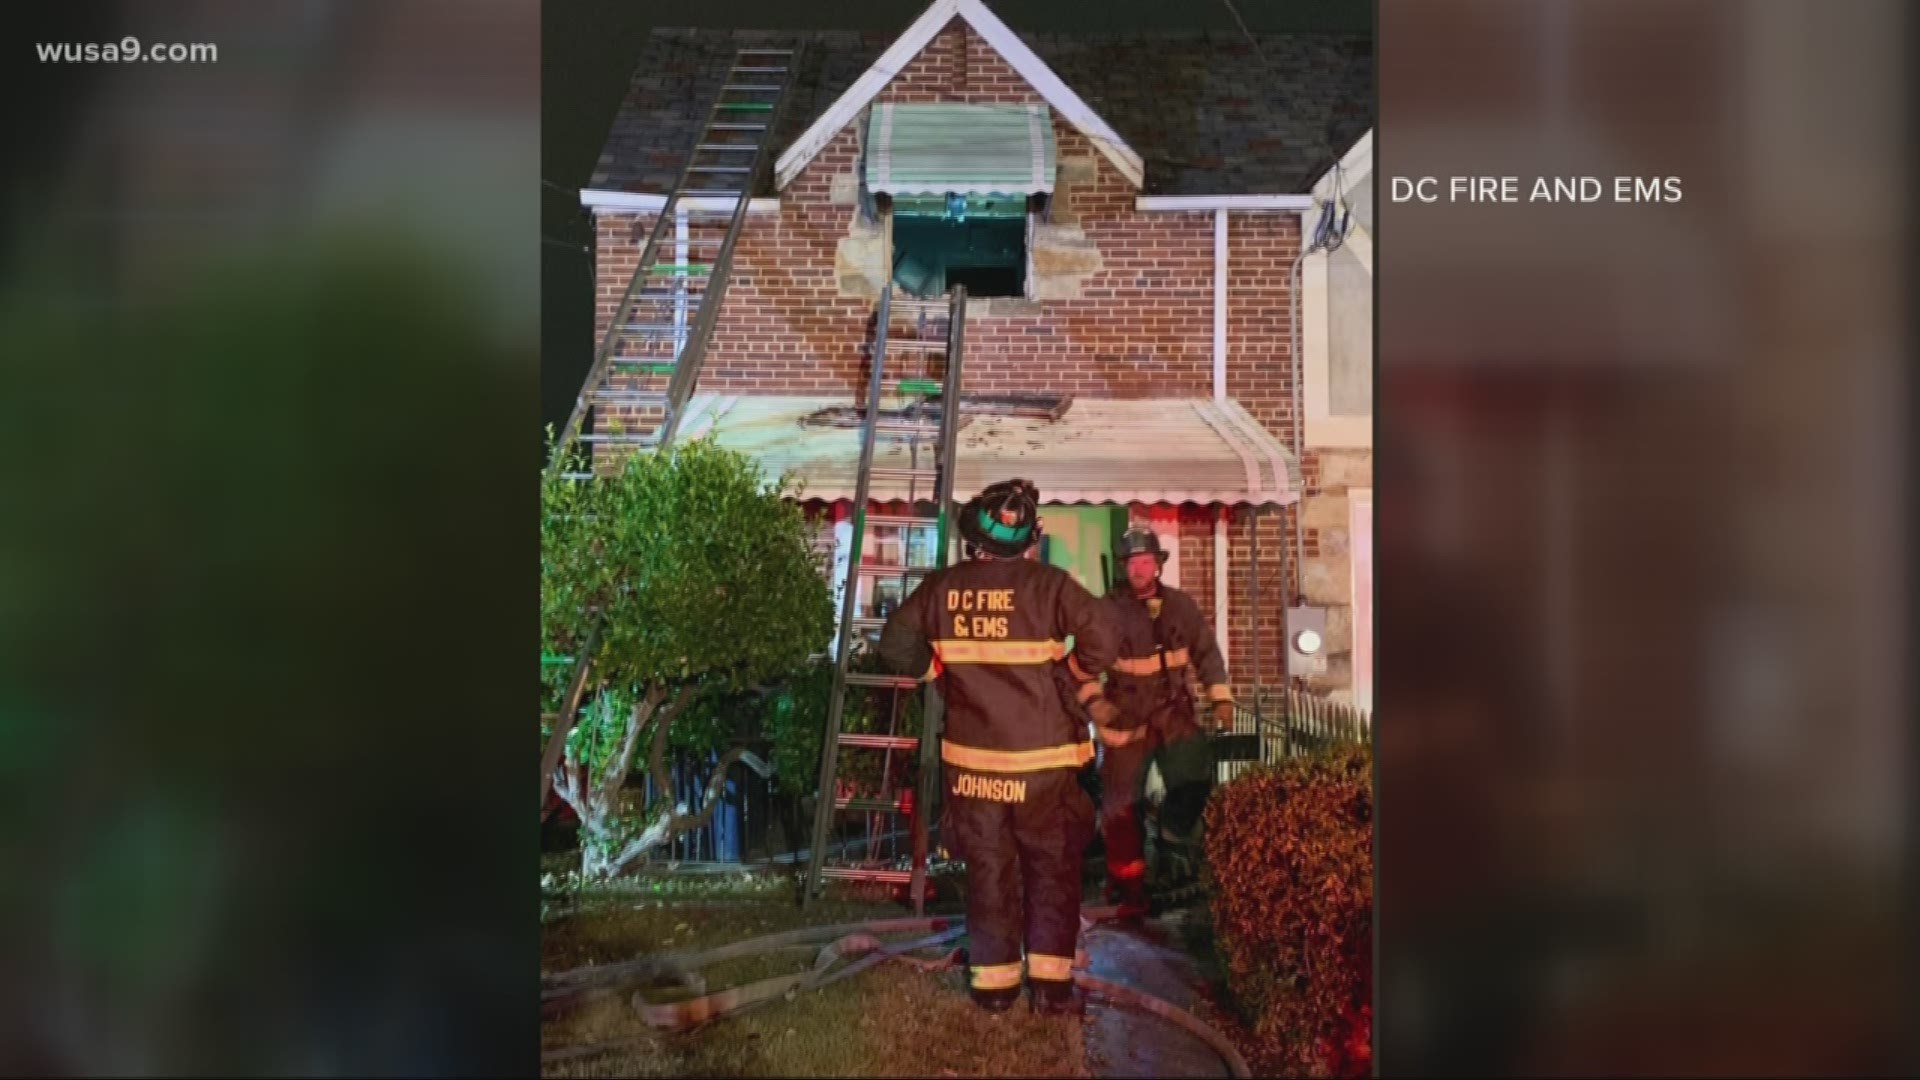 DC Fire and Emergency Medical Services responded to the home on Saturday evening.